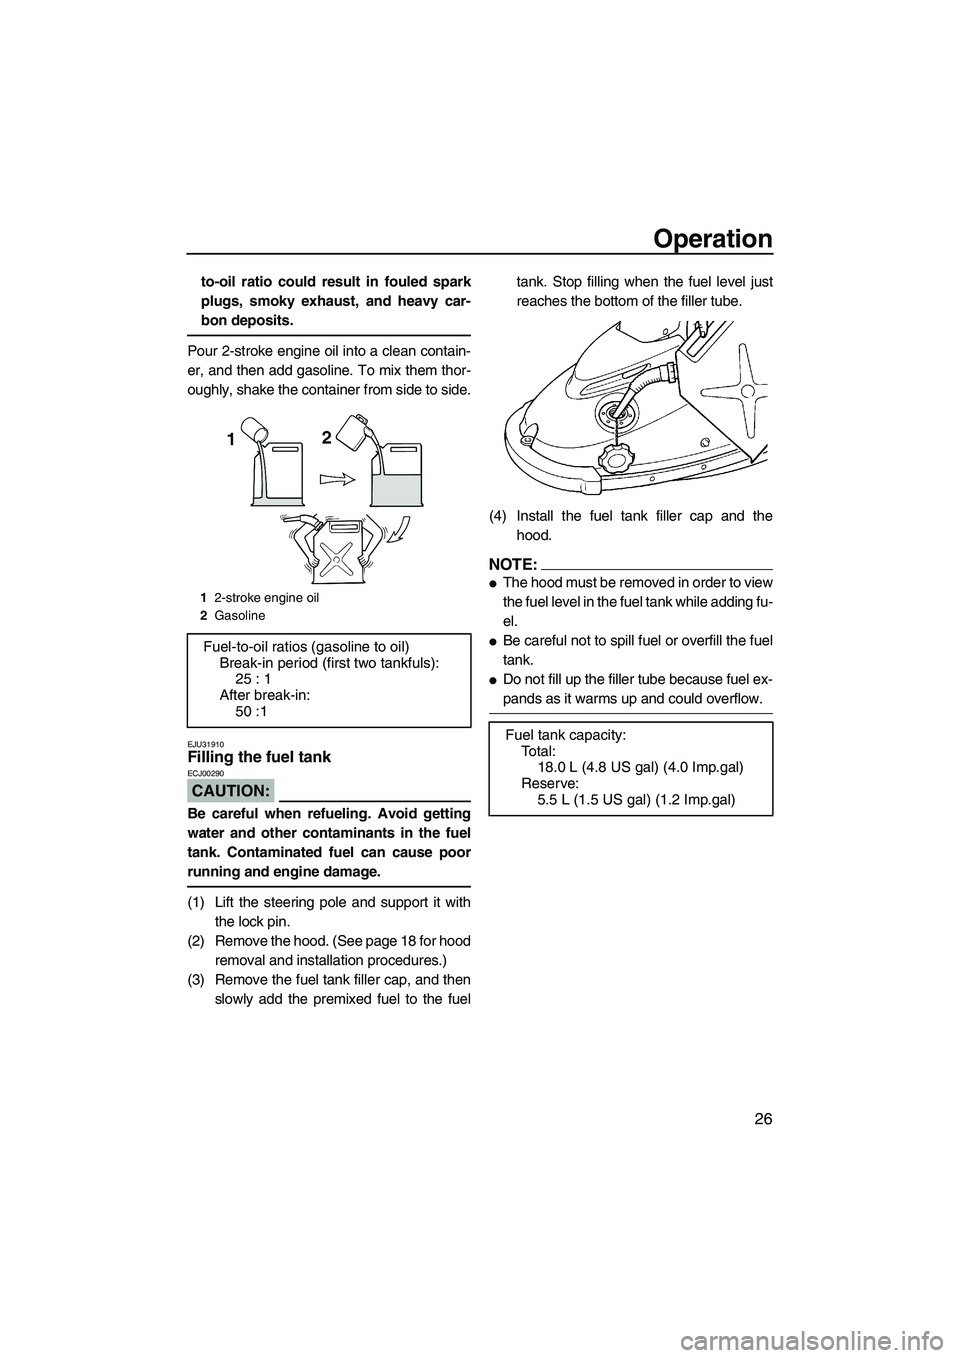 YAMAHA SUPERJET 2007  Owners Manual Operation
26
to-oil ratio could result in fouled spark
plugs, smoky exhaust, and heavy car-
bon deposits.
Pour 2-stroke engine oil into a clean contain-
er, and then add gasoline. To mix them thor-
ou